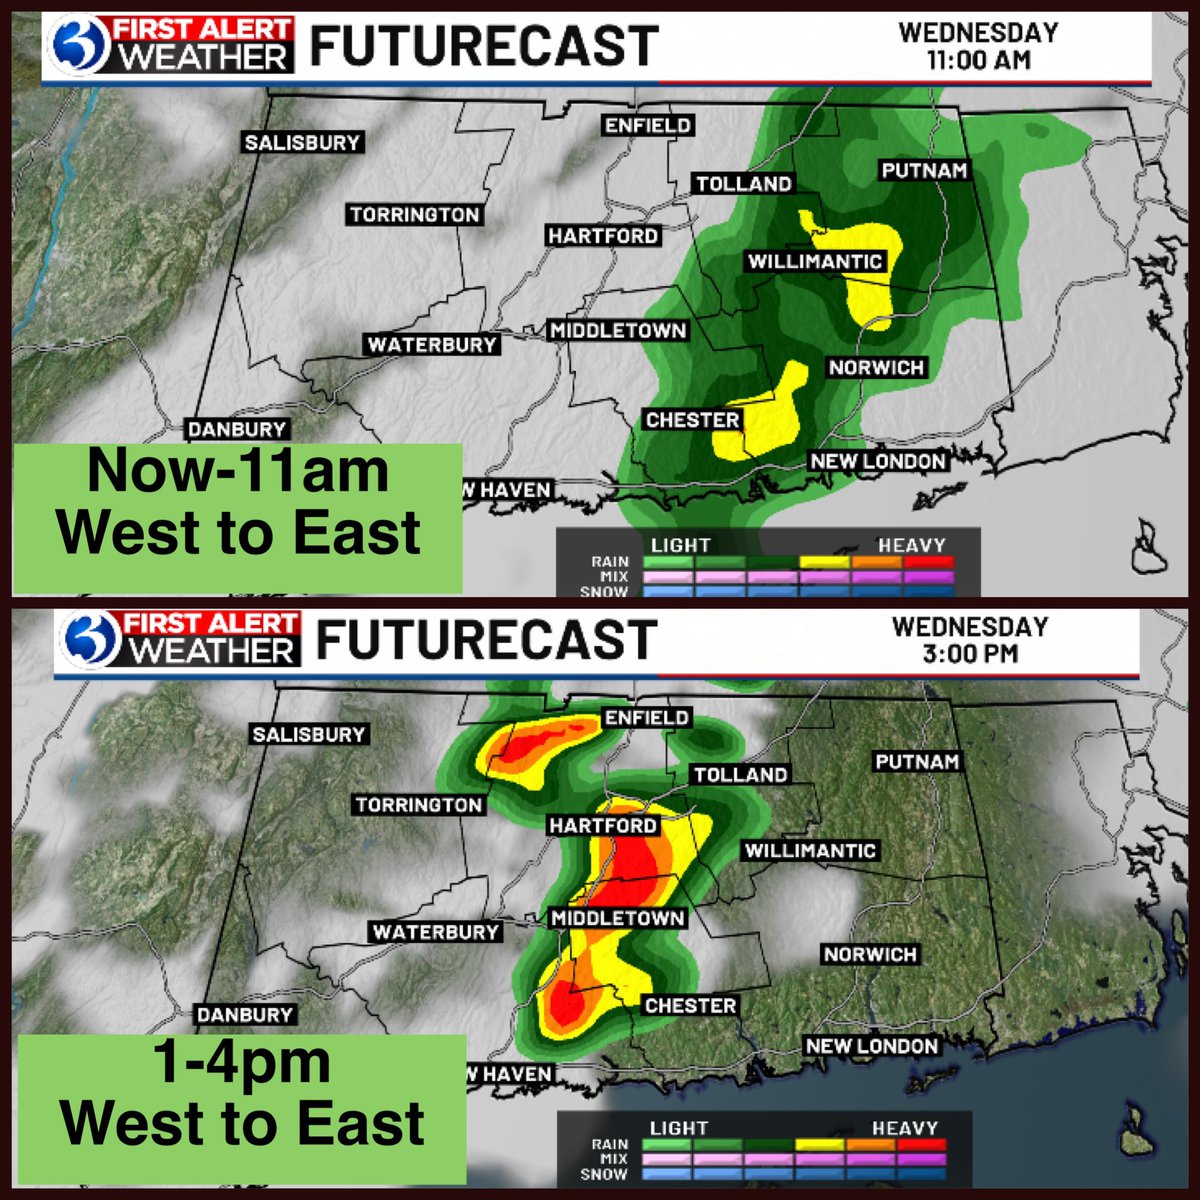 FIRST ALERT: 🟢 morning passing rain 🌧️ 🟡 afternoon passing heavier rain 🌧️ & storms 🔴 lightning ⚡️, low visibility, & 30-40 mph wind 💨 gusts @WFSBnews